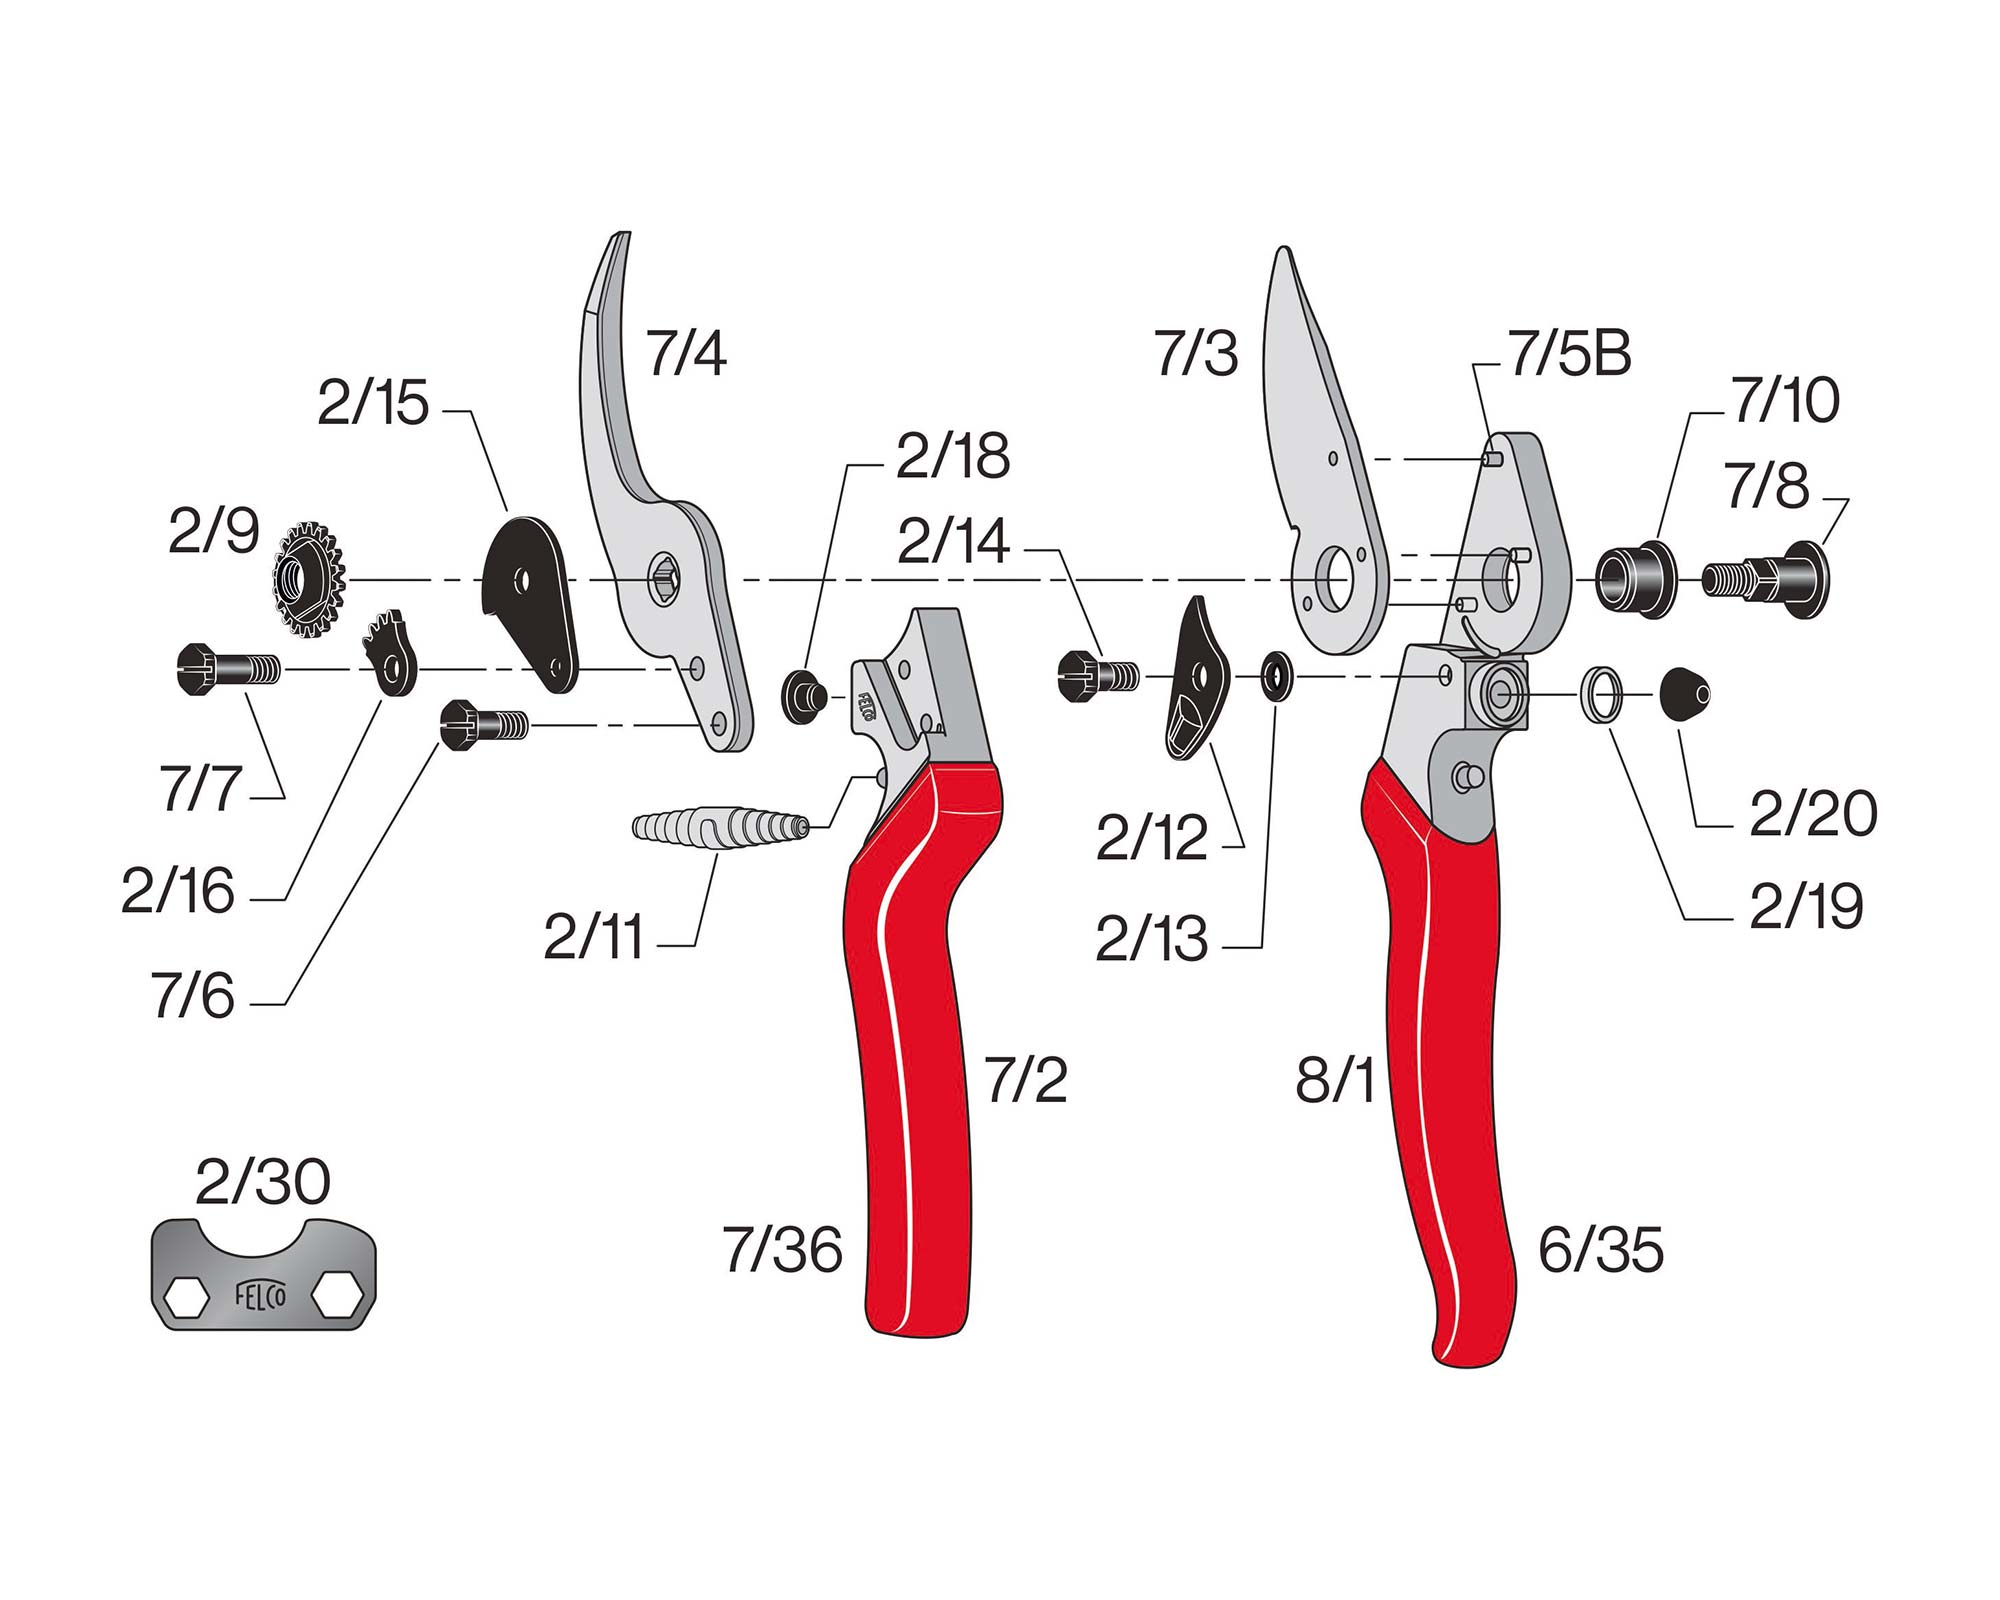 Exploded parts diagram for Felco 8 secateurs